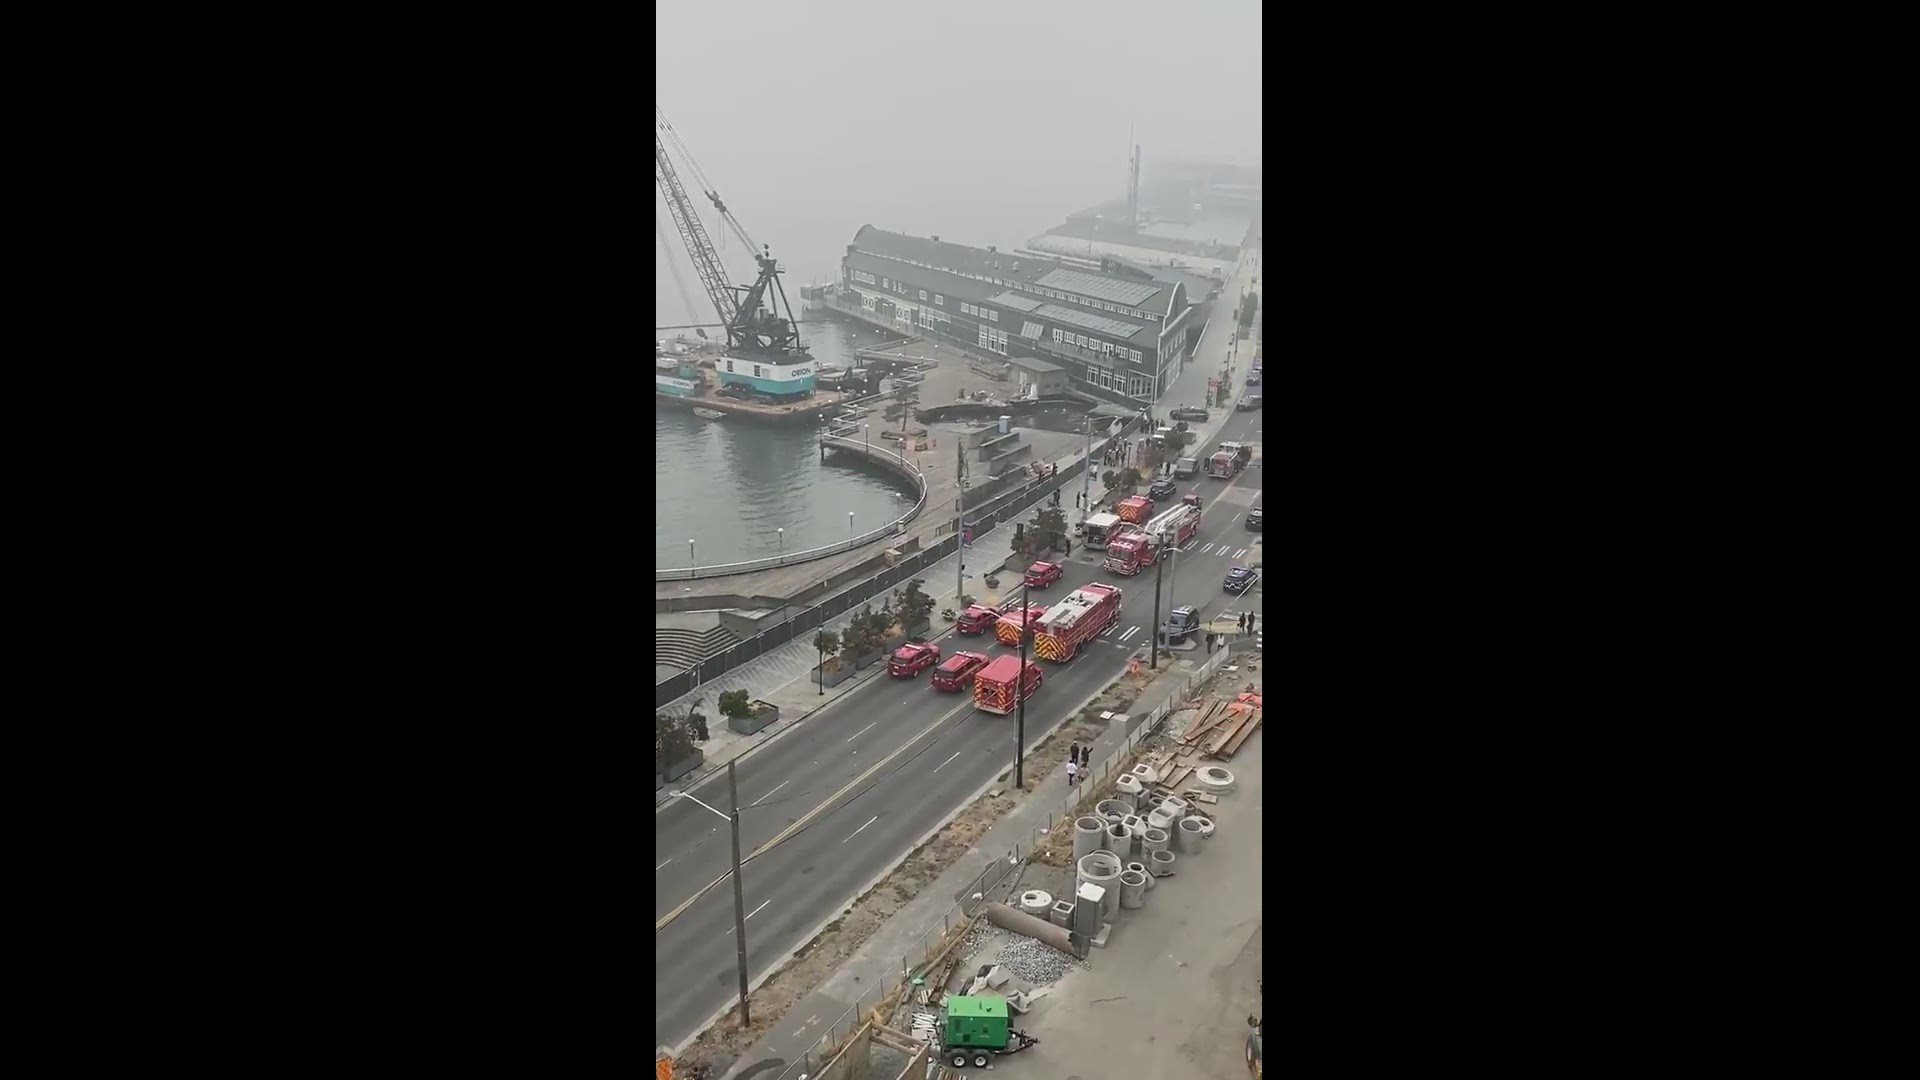 Video shot by Kelton Temby. Pier 58 was starting to be dismantled when it partially collapsed, sending construction workers into the water.